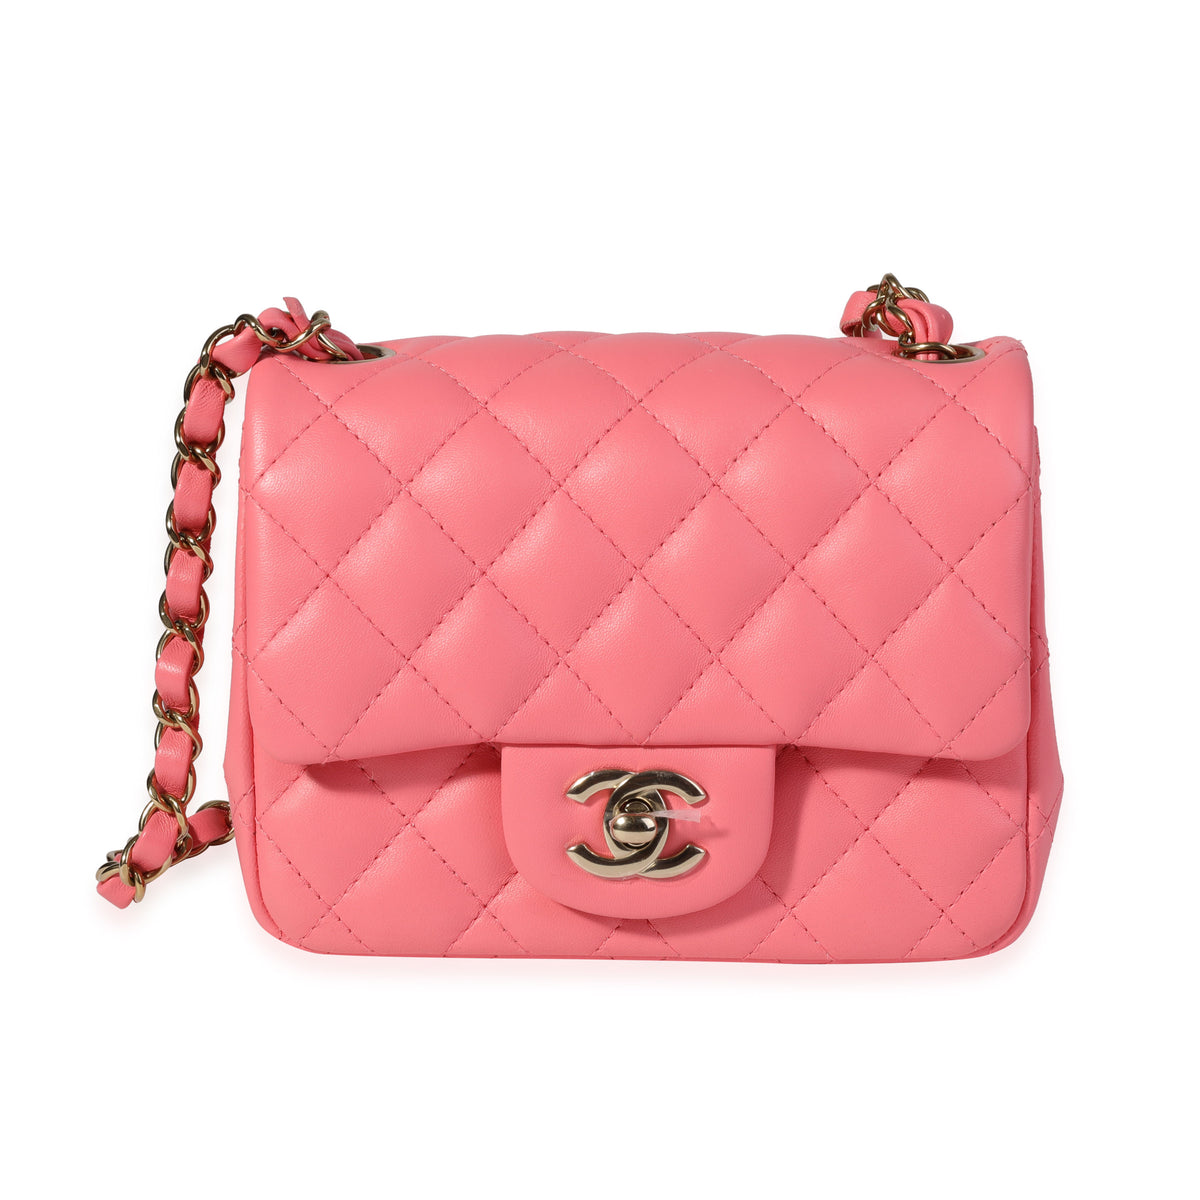 Chanel Pink Quilted Lambskin Square Mini Classic Flap Bag